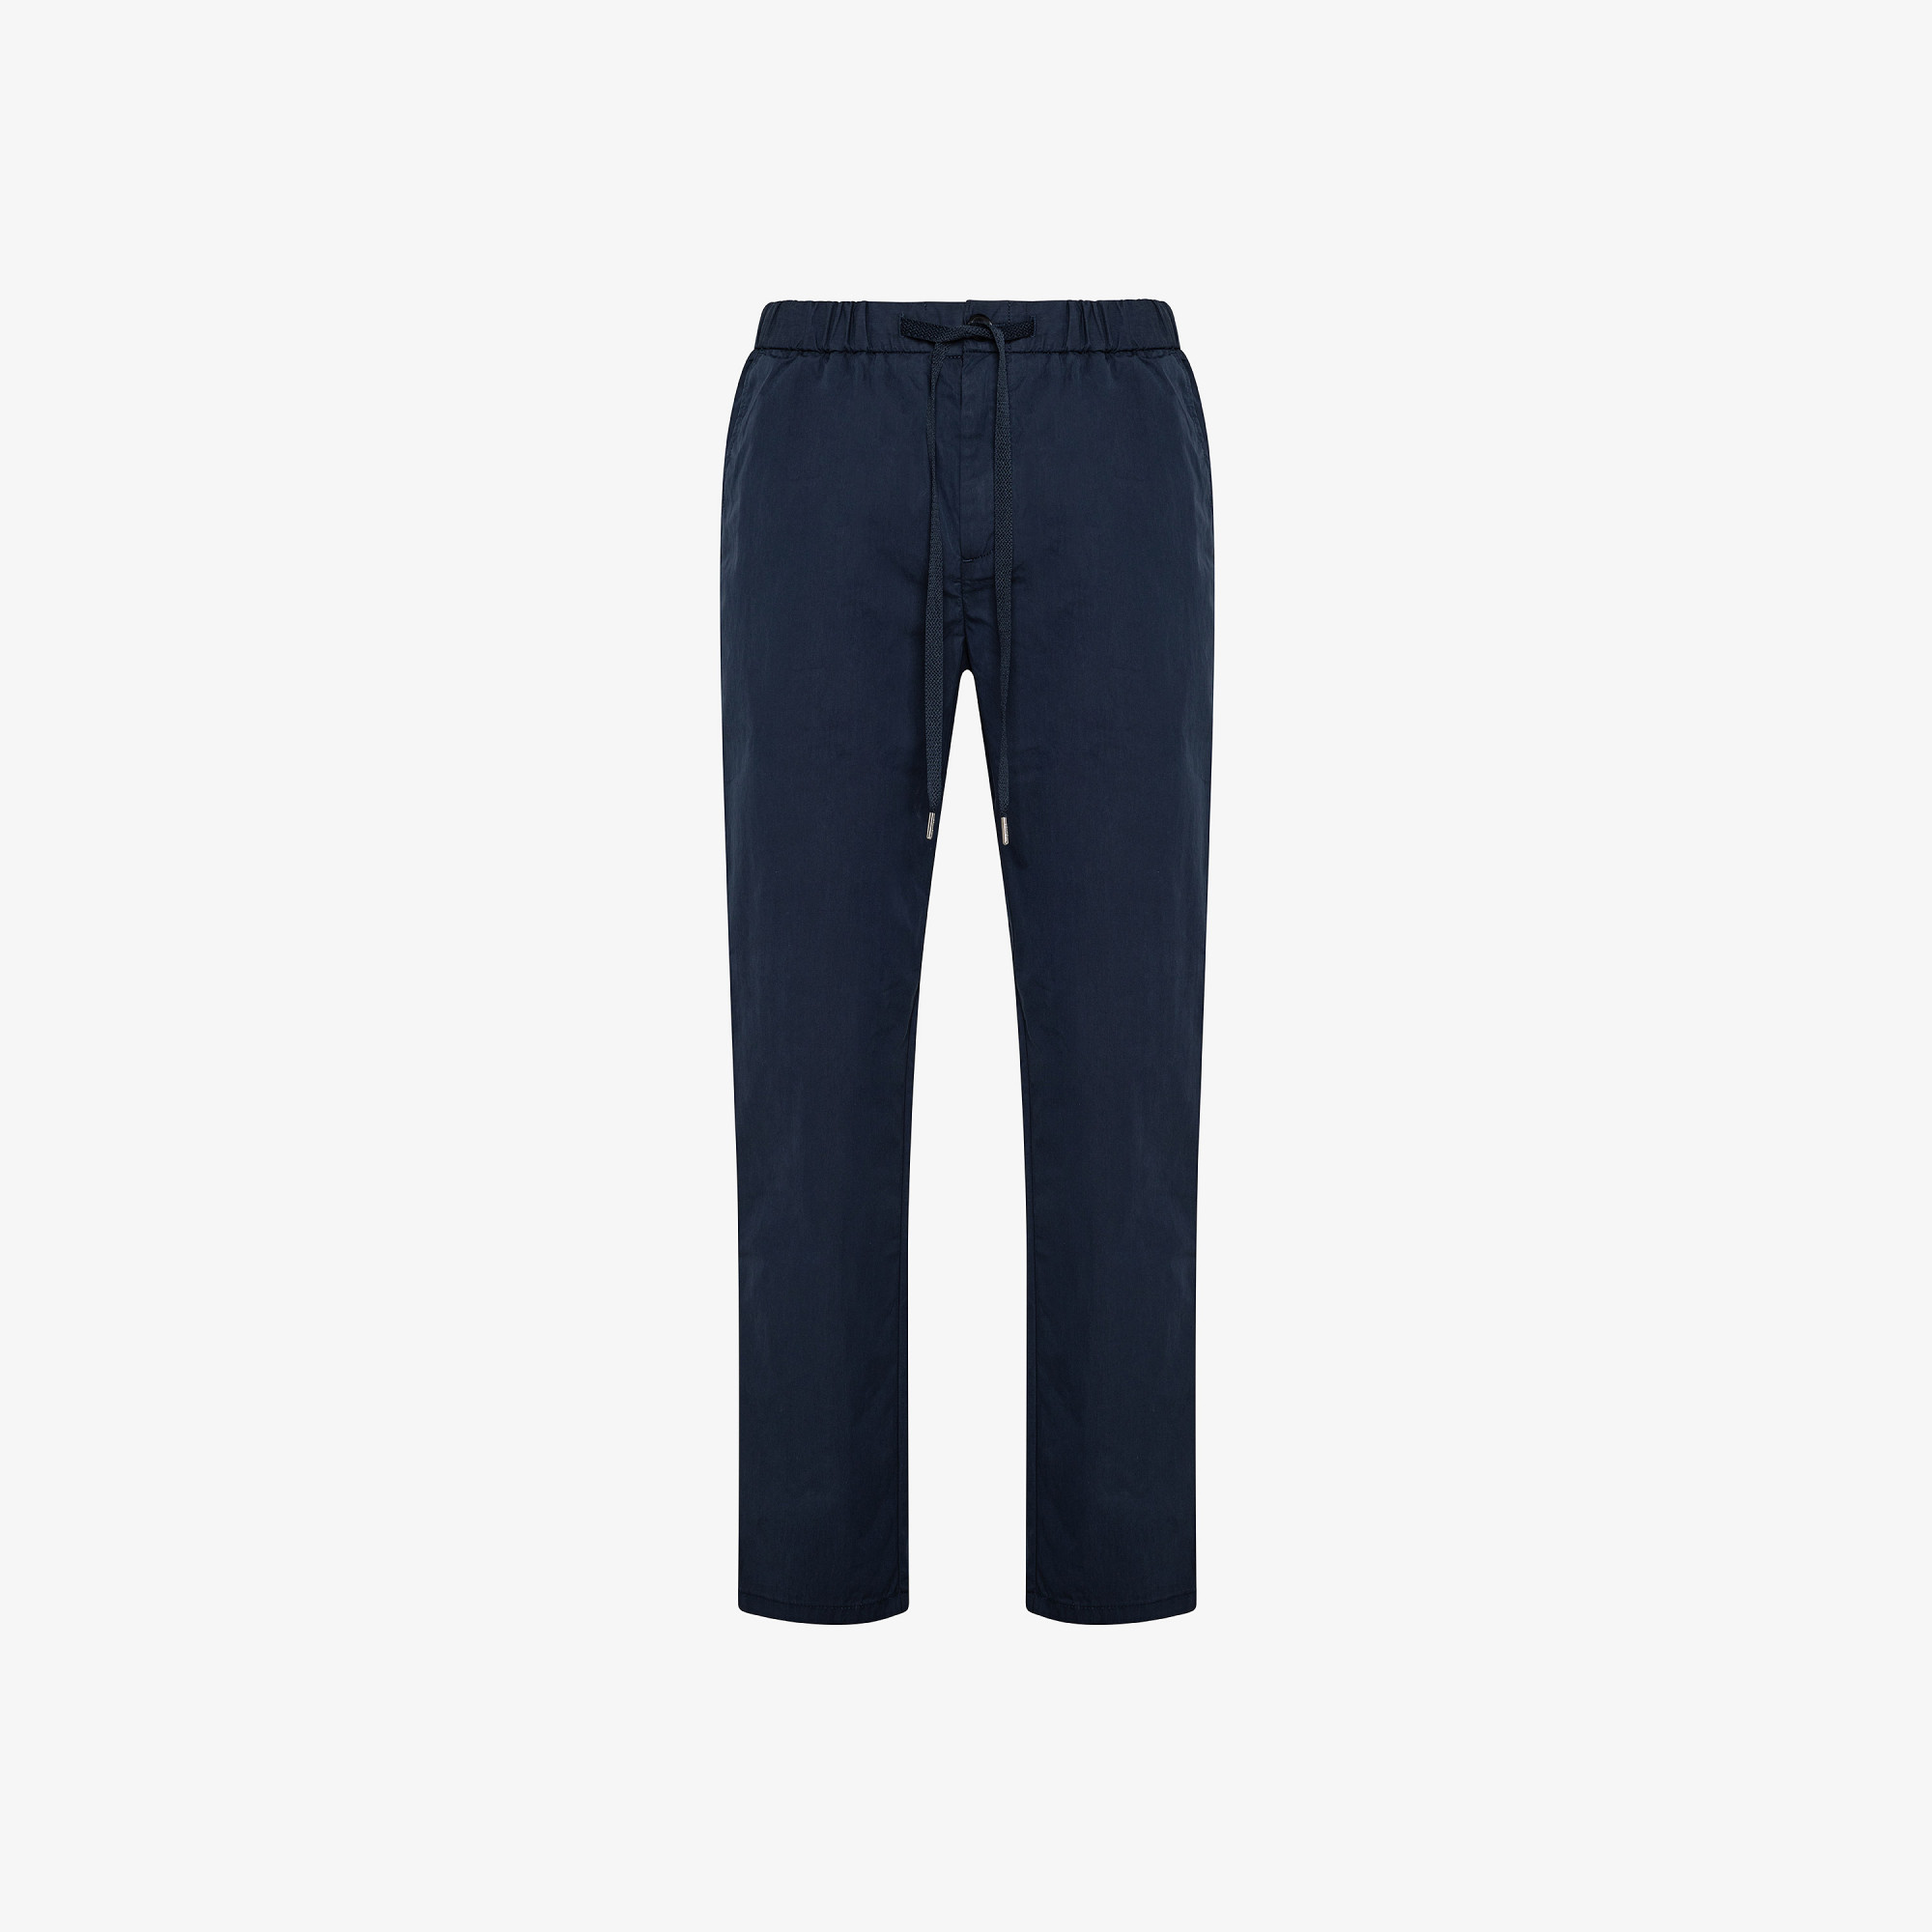 PANT COULISSE SOLID NAVY BLUE